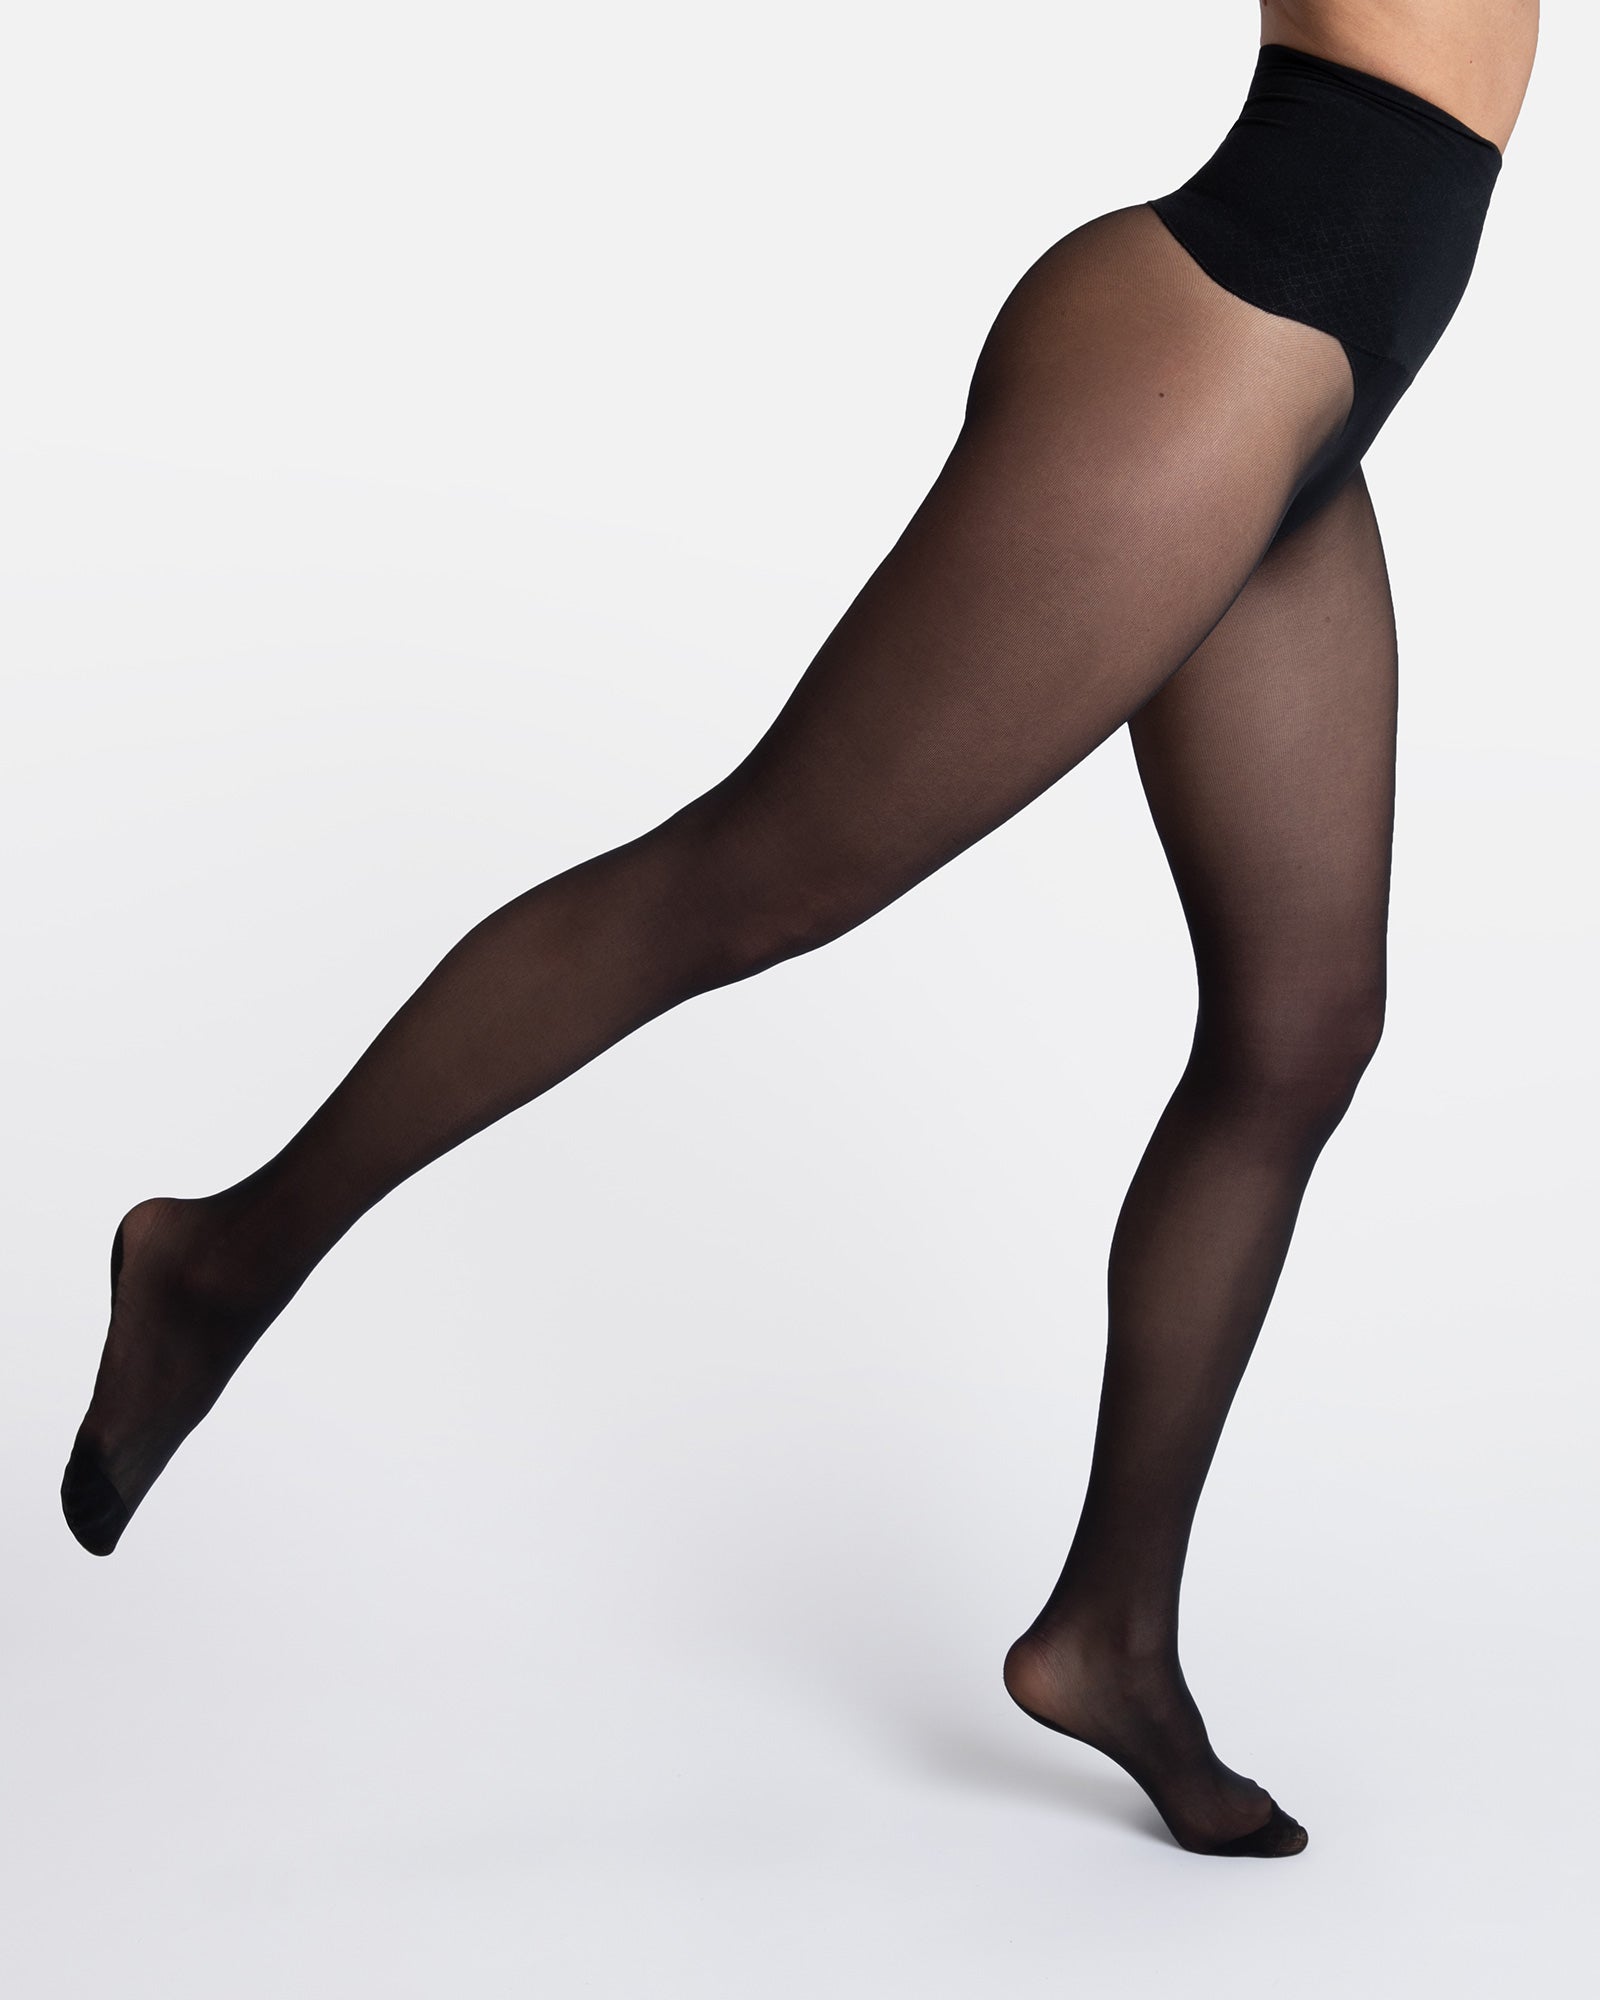 Gipsy 30 Denier ECO Tights From Recycled Yarns 1818